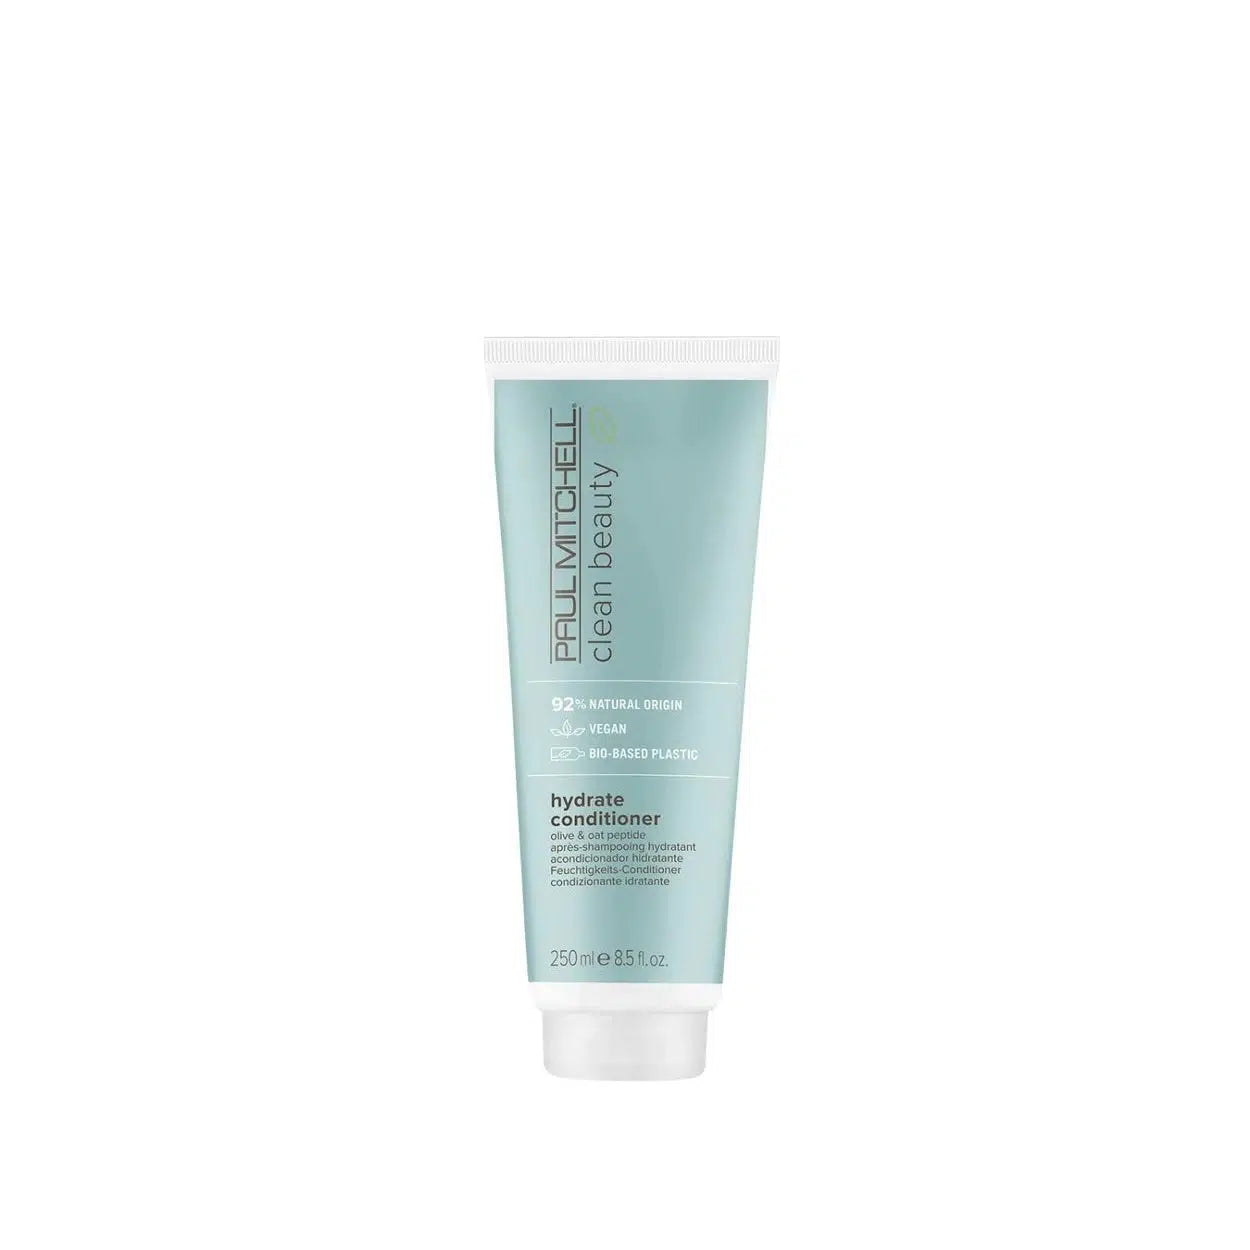 Paul Mitchell Clean Beauty Hydrate hárnæring